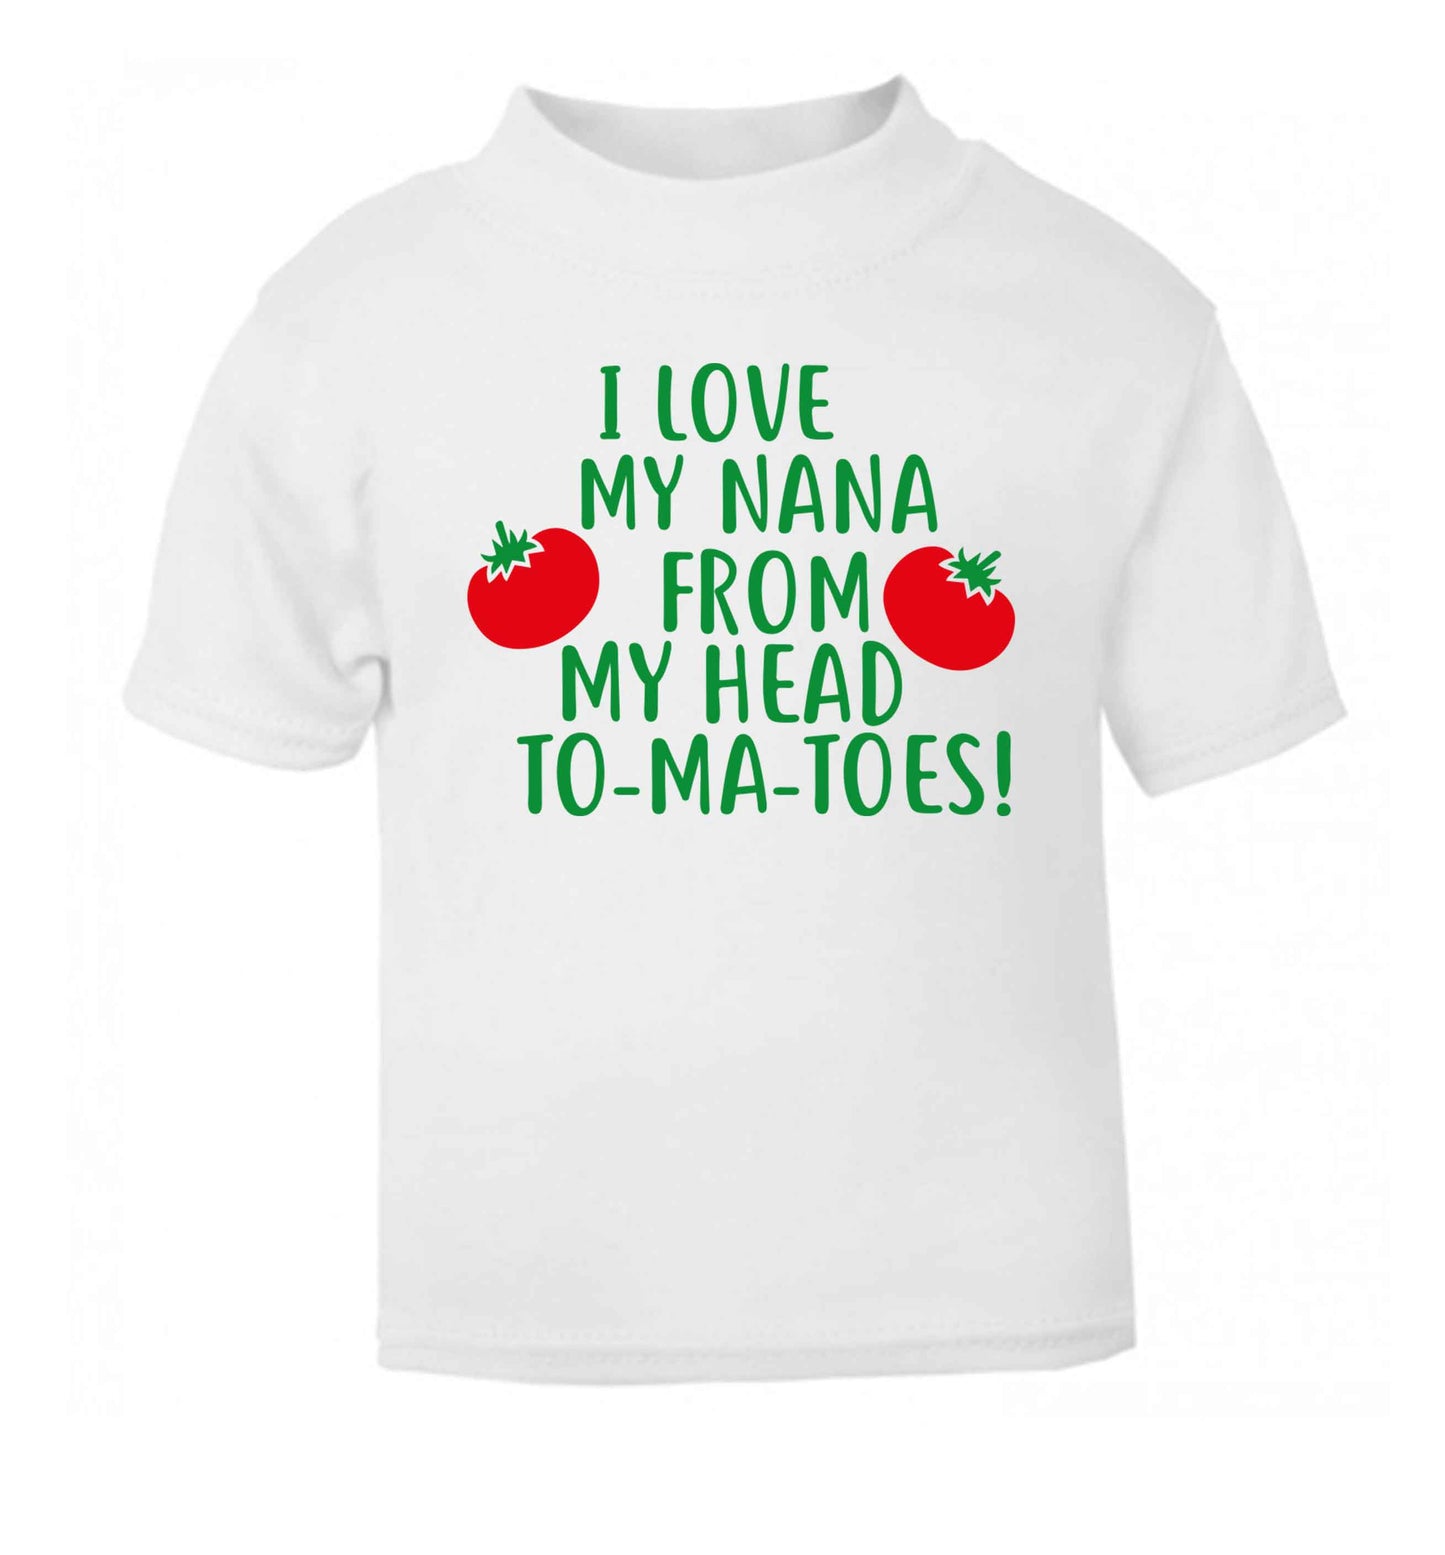 I love my nana from my head to-ma-toes white Baby Toddler Tshirt 2 Years